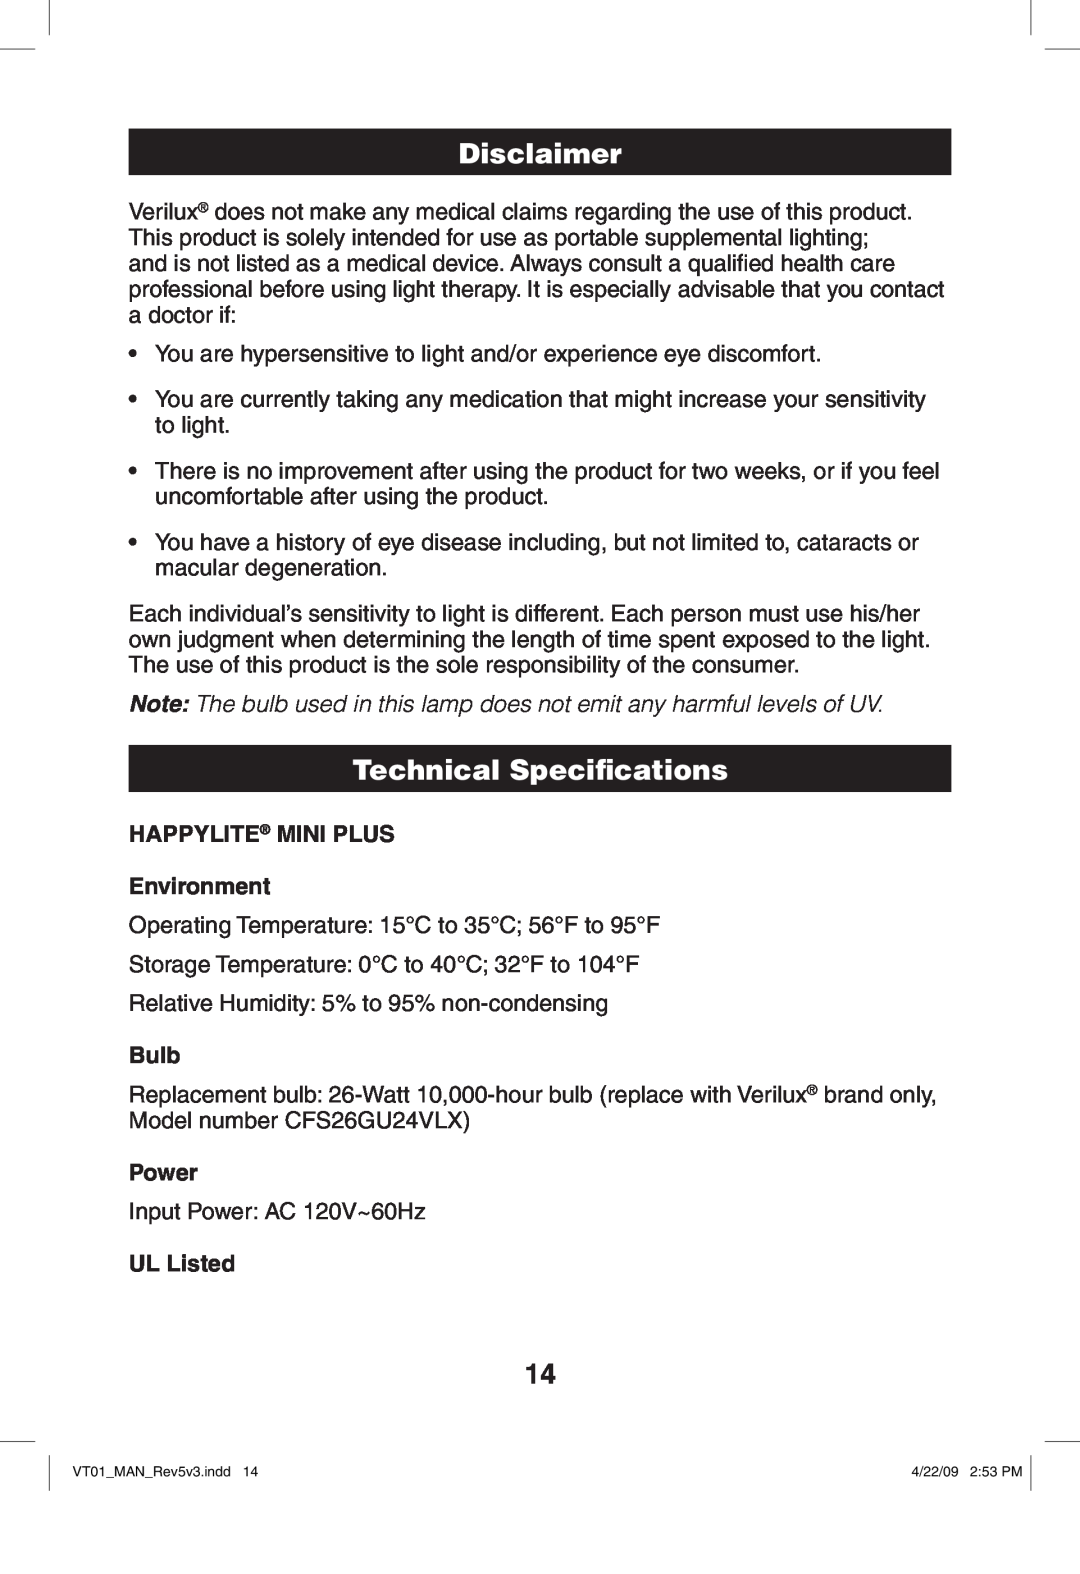 Verilux VT01 manual Disclaimer, Technical Speciﬁcations, HAPPYLITE MINI PLUS Environment, Bulb, Power, UL Listed 